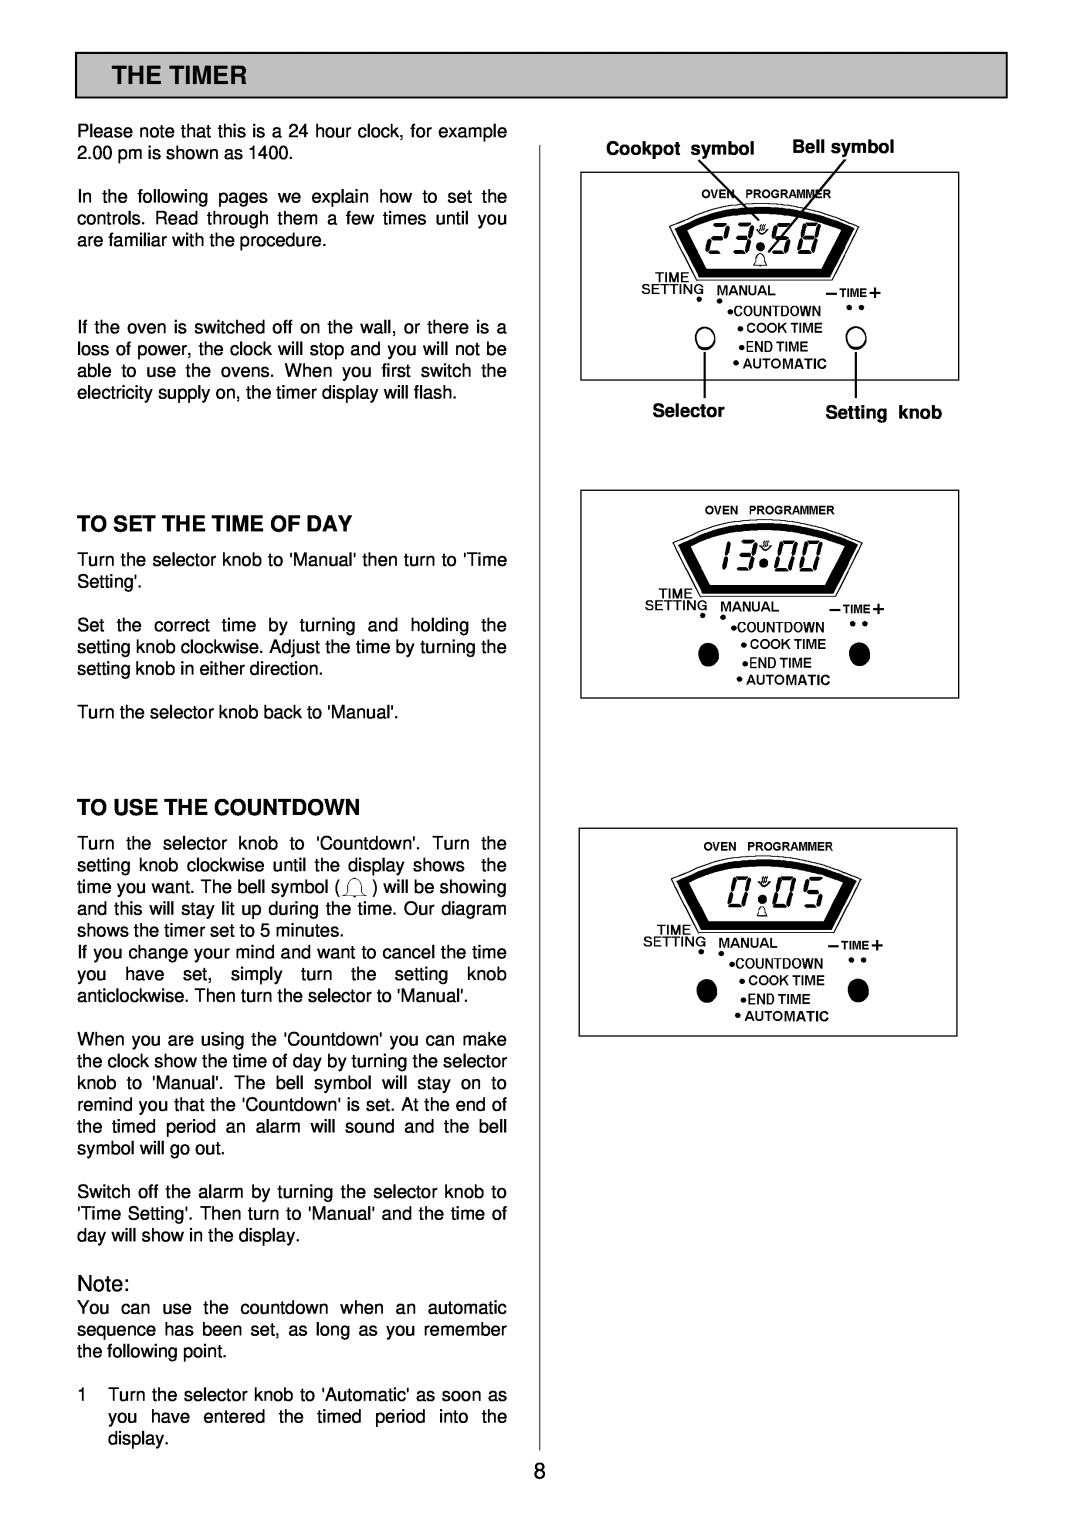 Electrolux SIM 533 installation instructions The Timer, To Set The Time Of Day, To Use The Countdown 